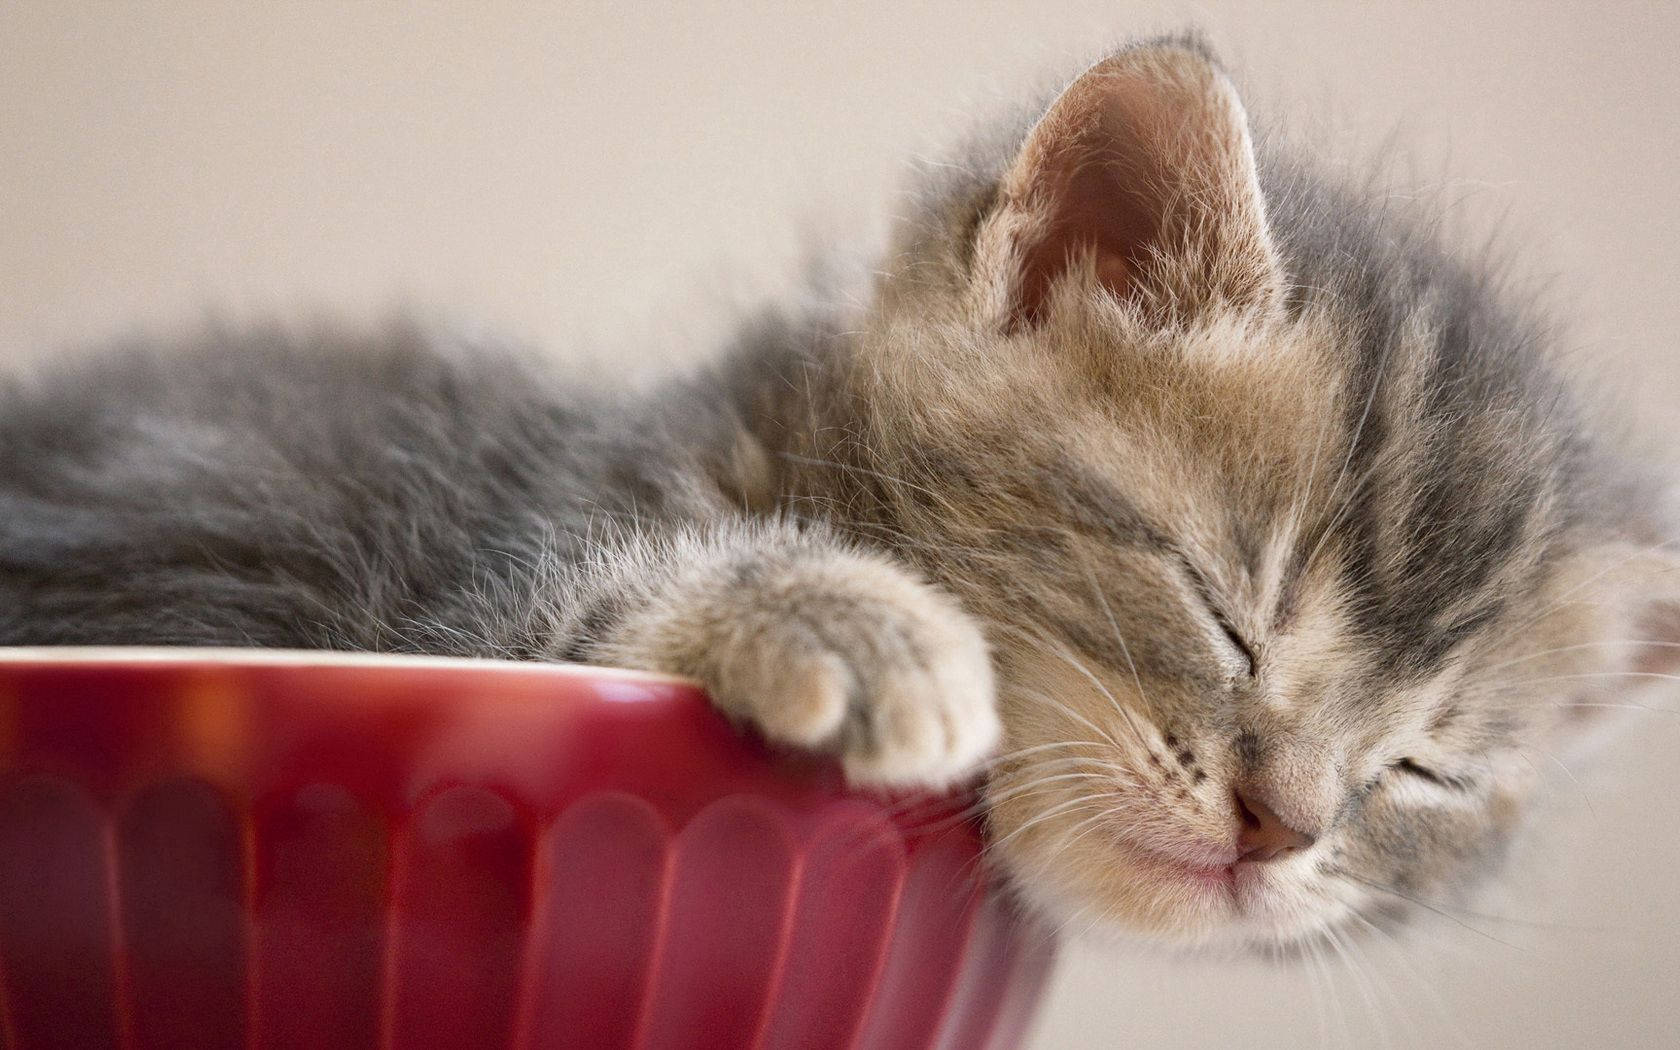 Adorable Kitten Napping In A Cup